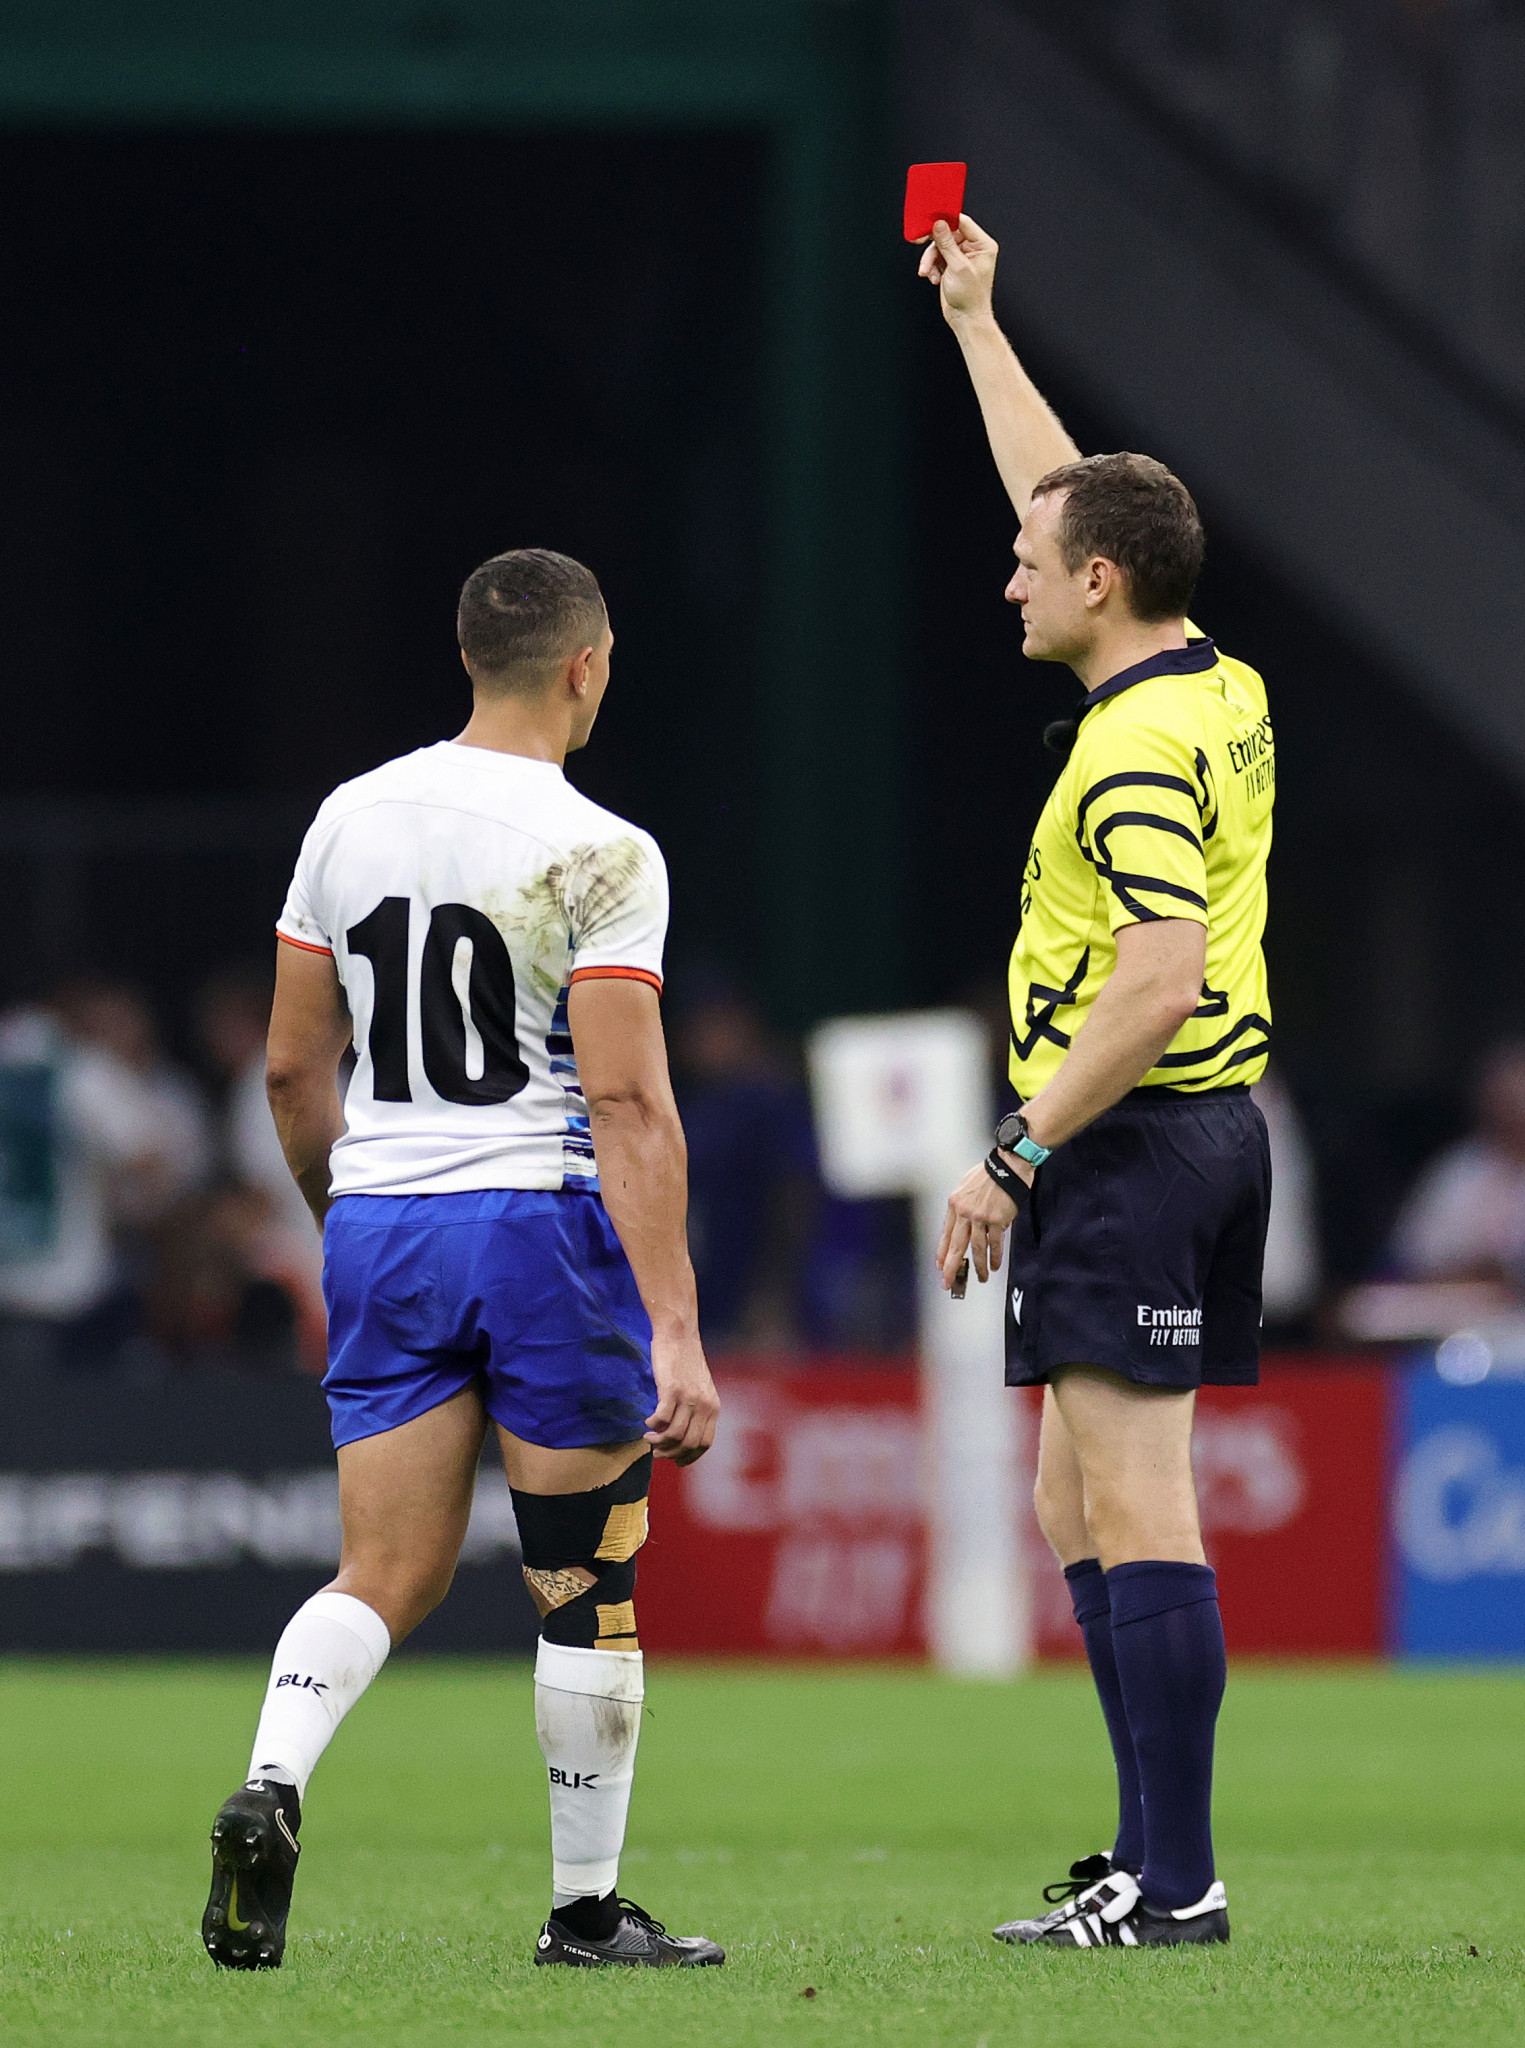 Namibia's captain Johan Deysel was shown a red card and has been banned for six matches ©Getty Images